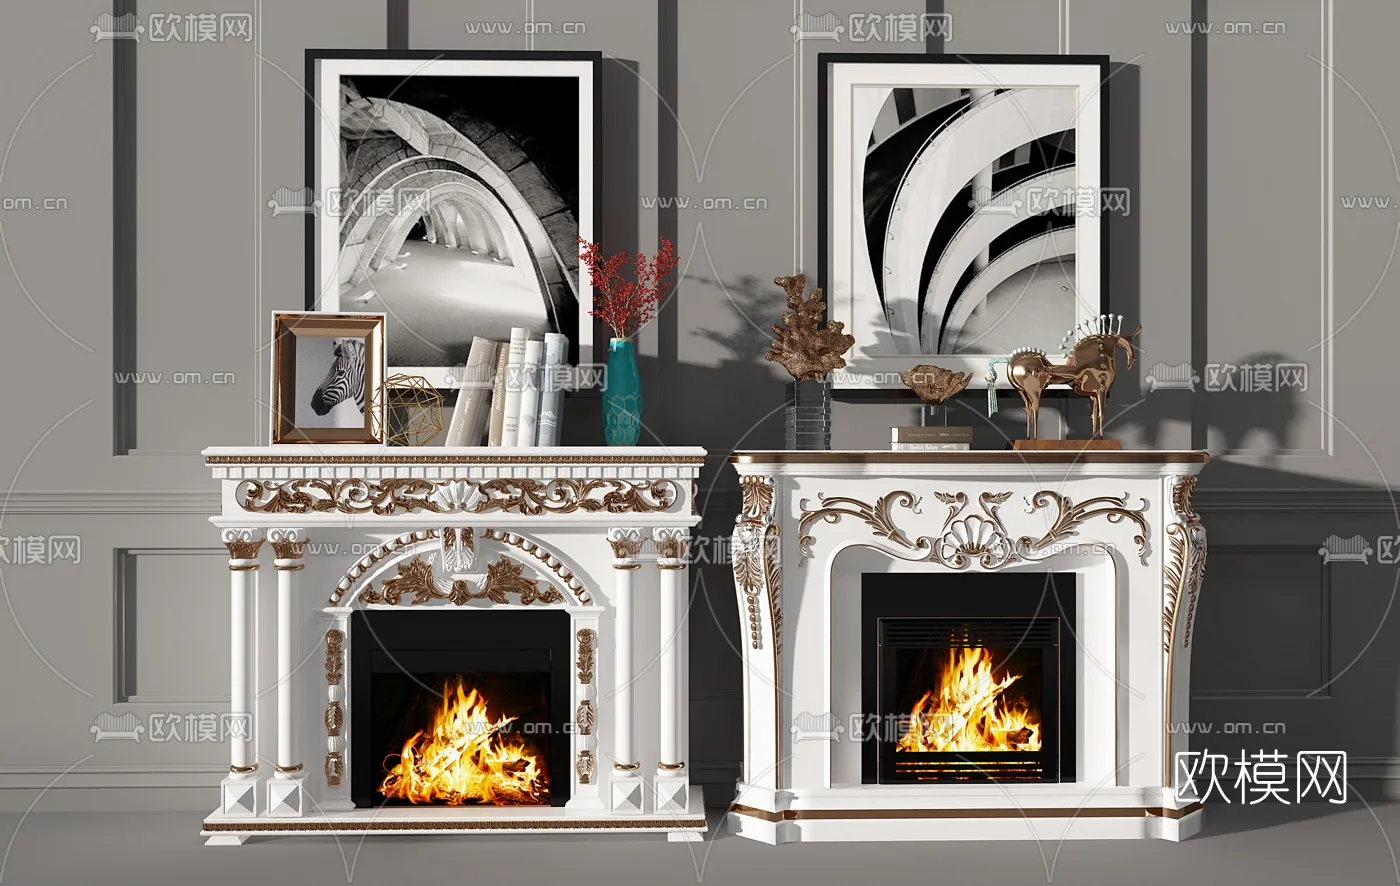 CLASSIC – FIREPLACE 3DMODELS – 020